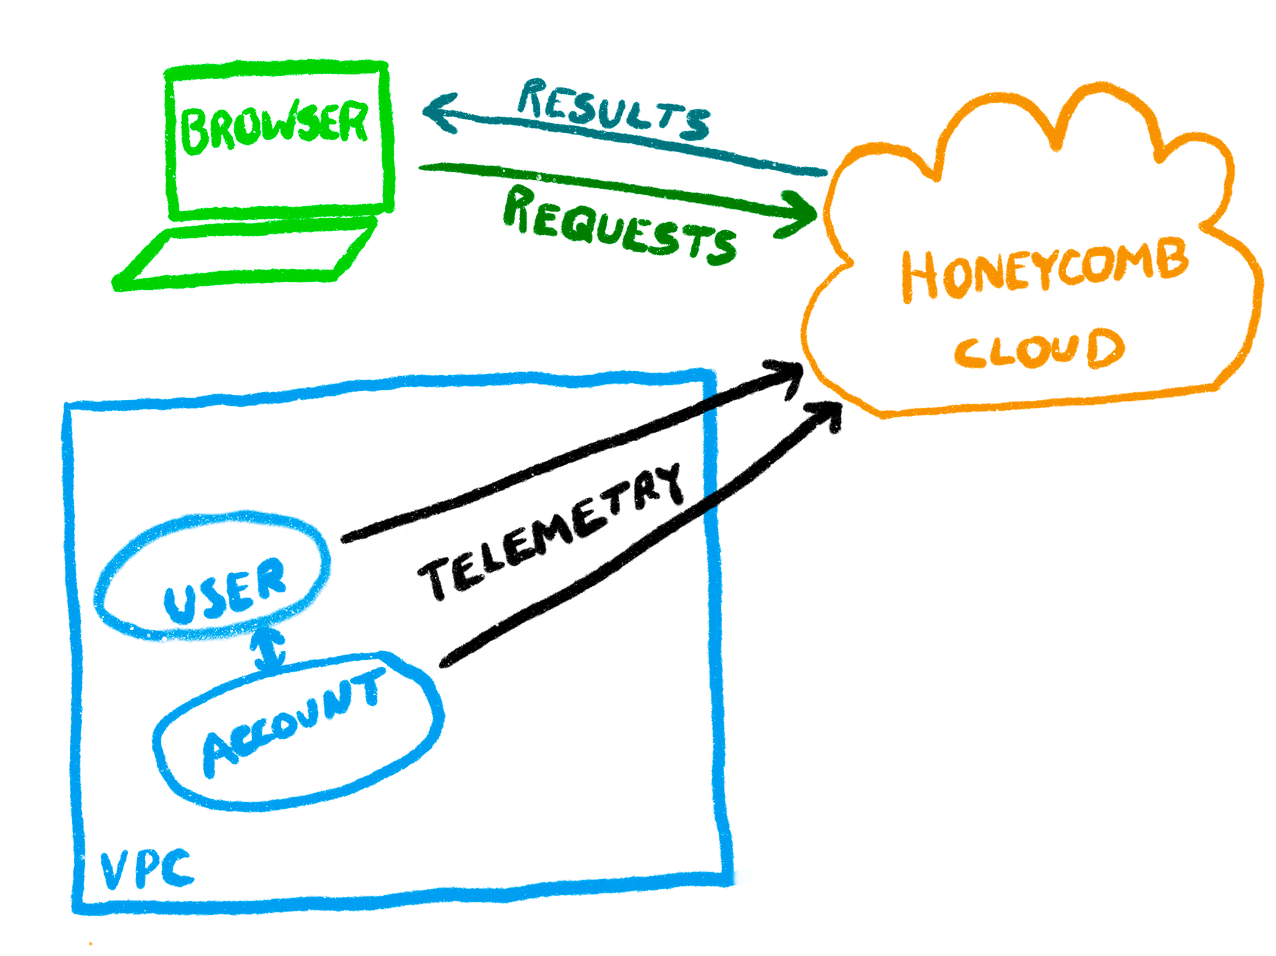 Multiple services in a VPC, sending telemetry to the Honeycomb cloud, with a browser querying the cloud.